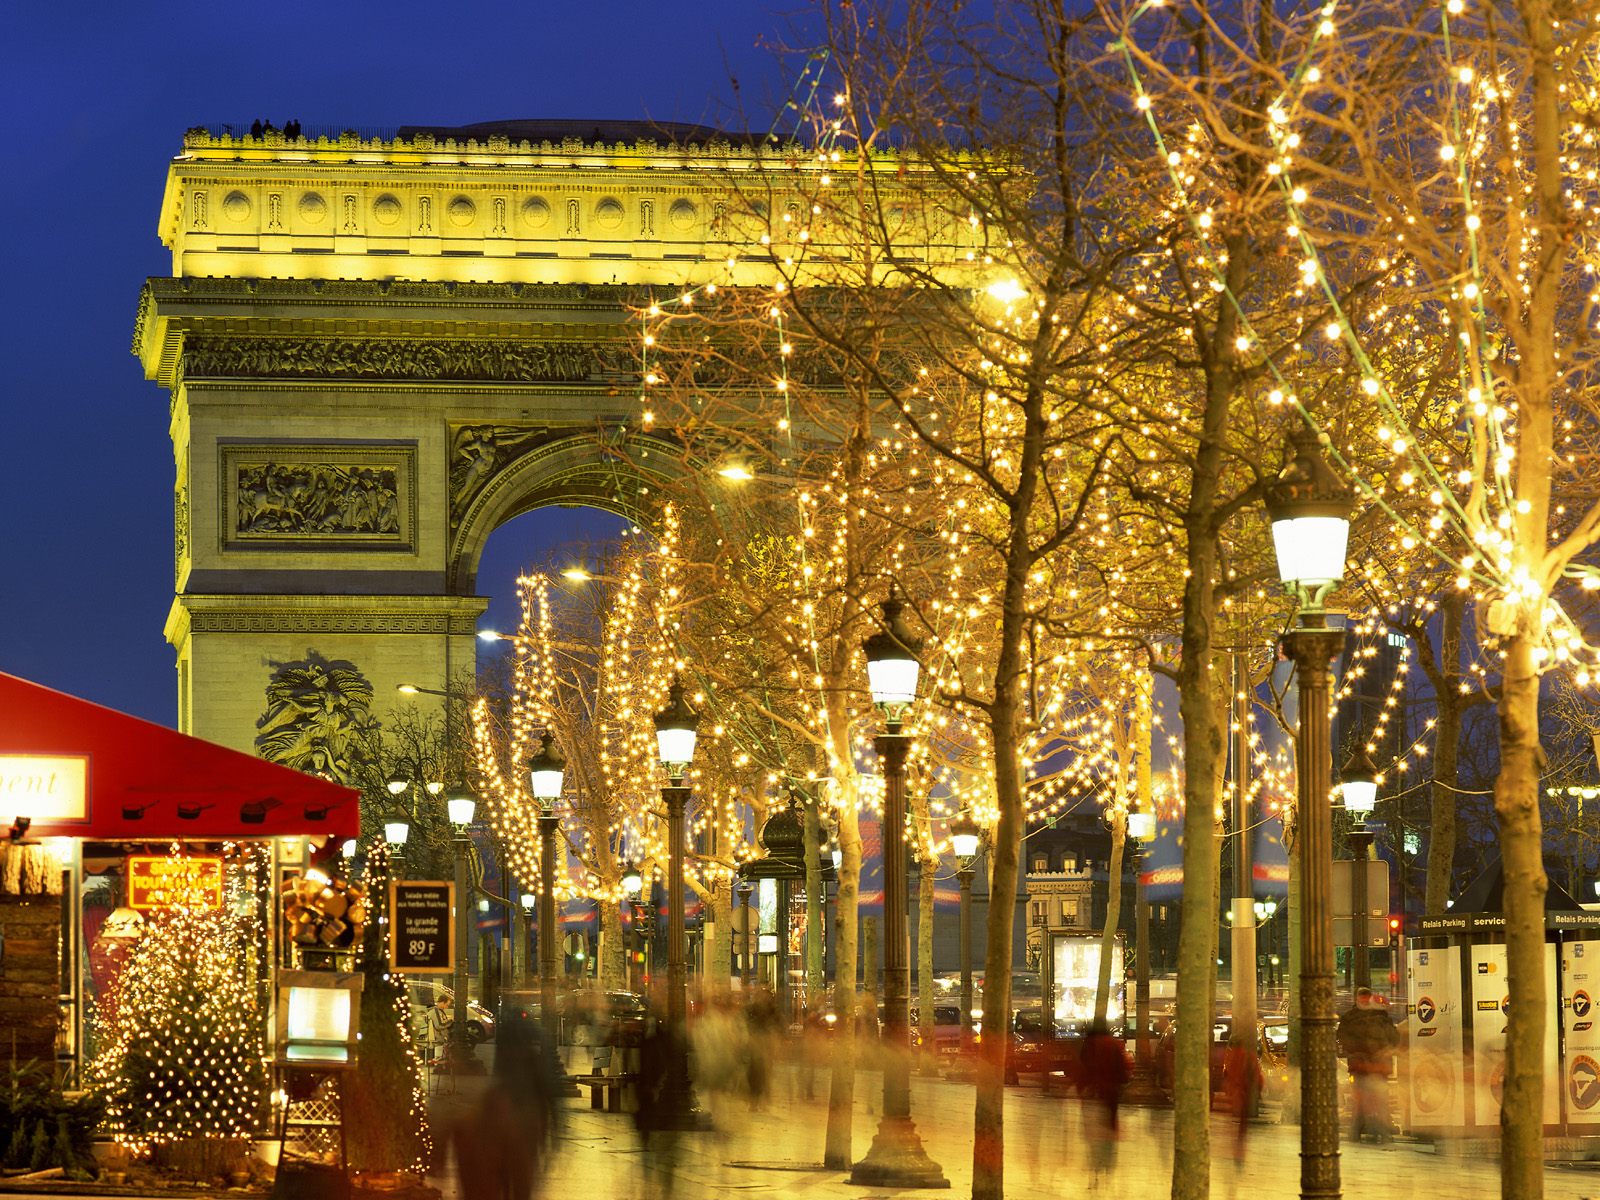 Christmas in Paris wallpapers and images - wallpapers, pictures ...